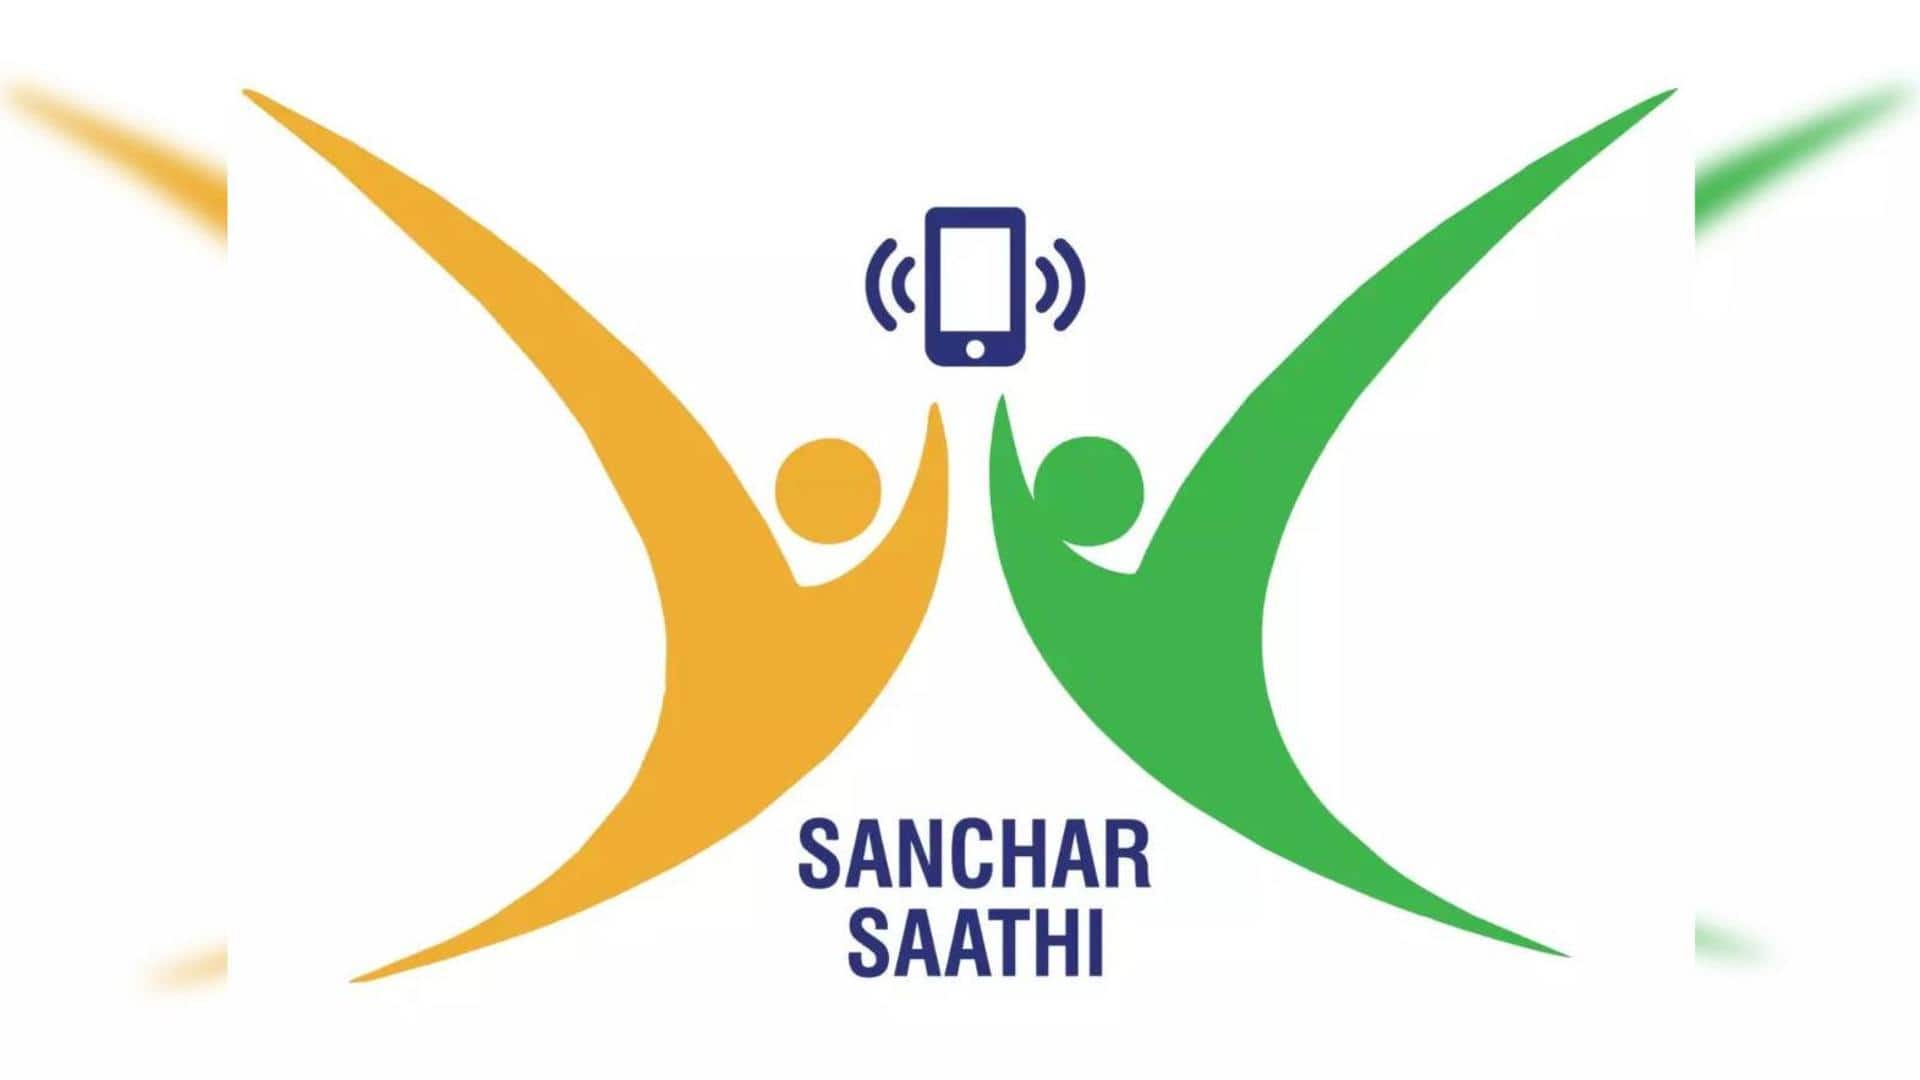 CEIR-based 'Sanchar Saathi' portal launched: How it'll protect smartphone users